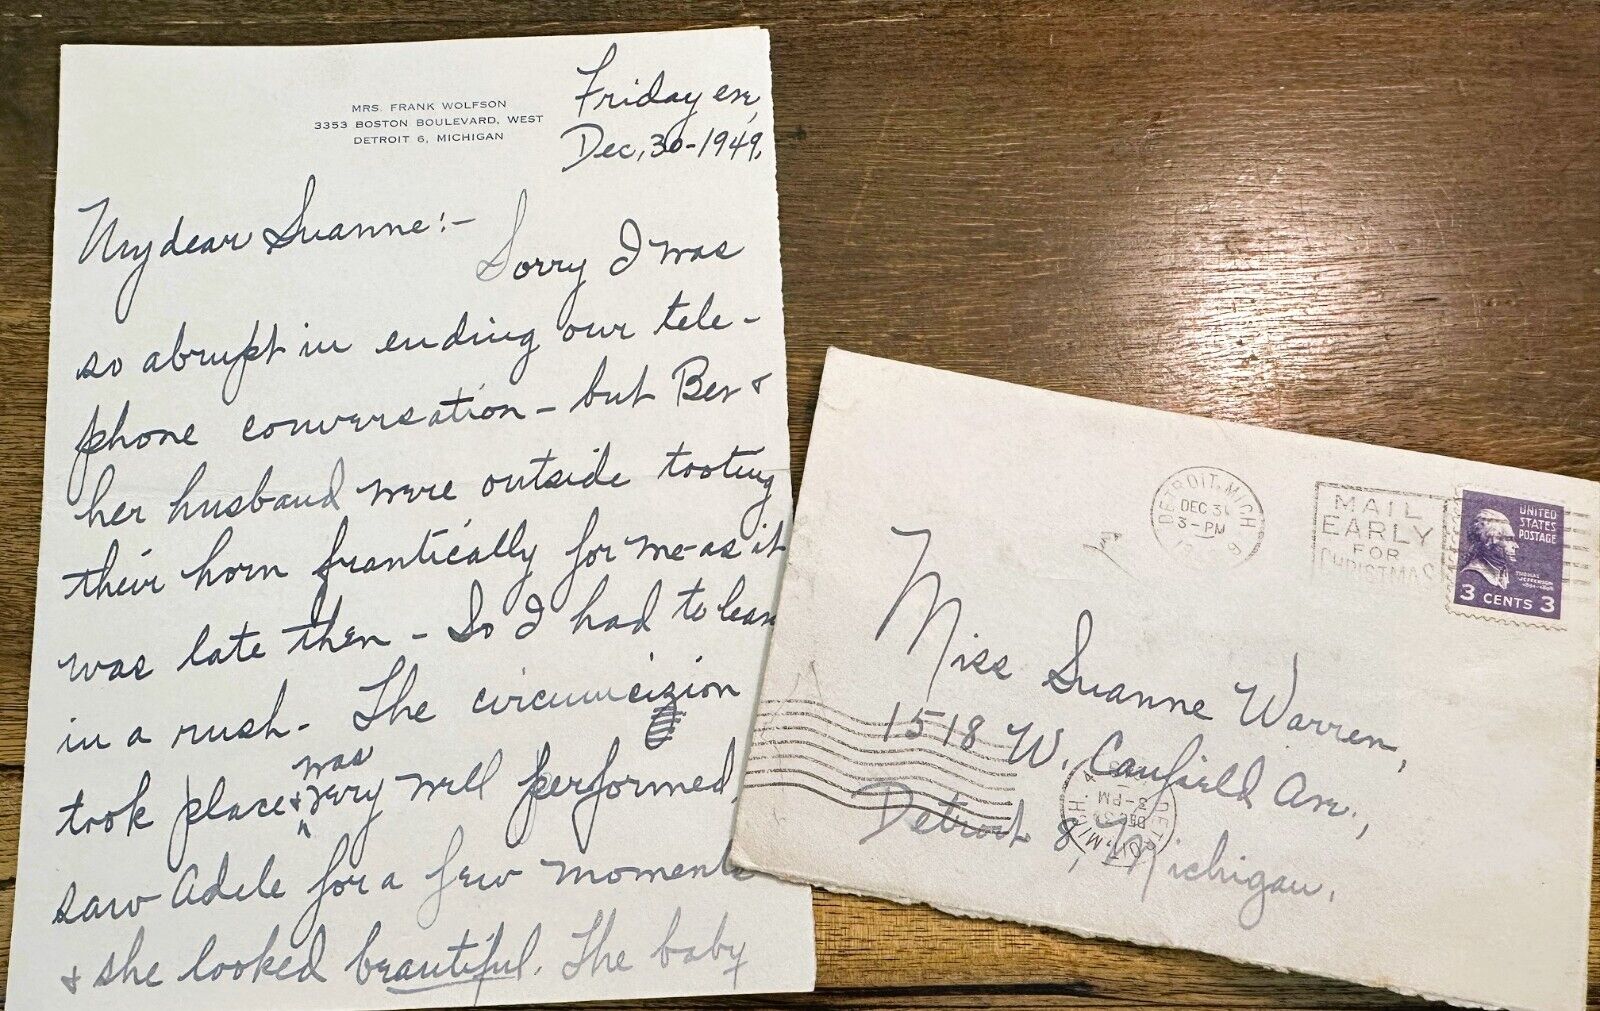 1949 Handwritten Letter by Angry Detroit Ex-Wife Re: Circumcision w/ Envelope